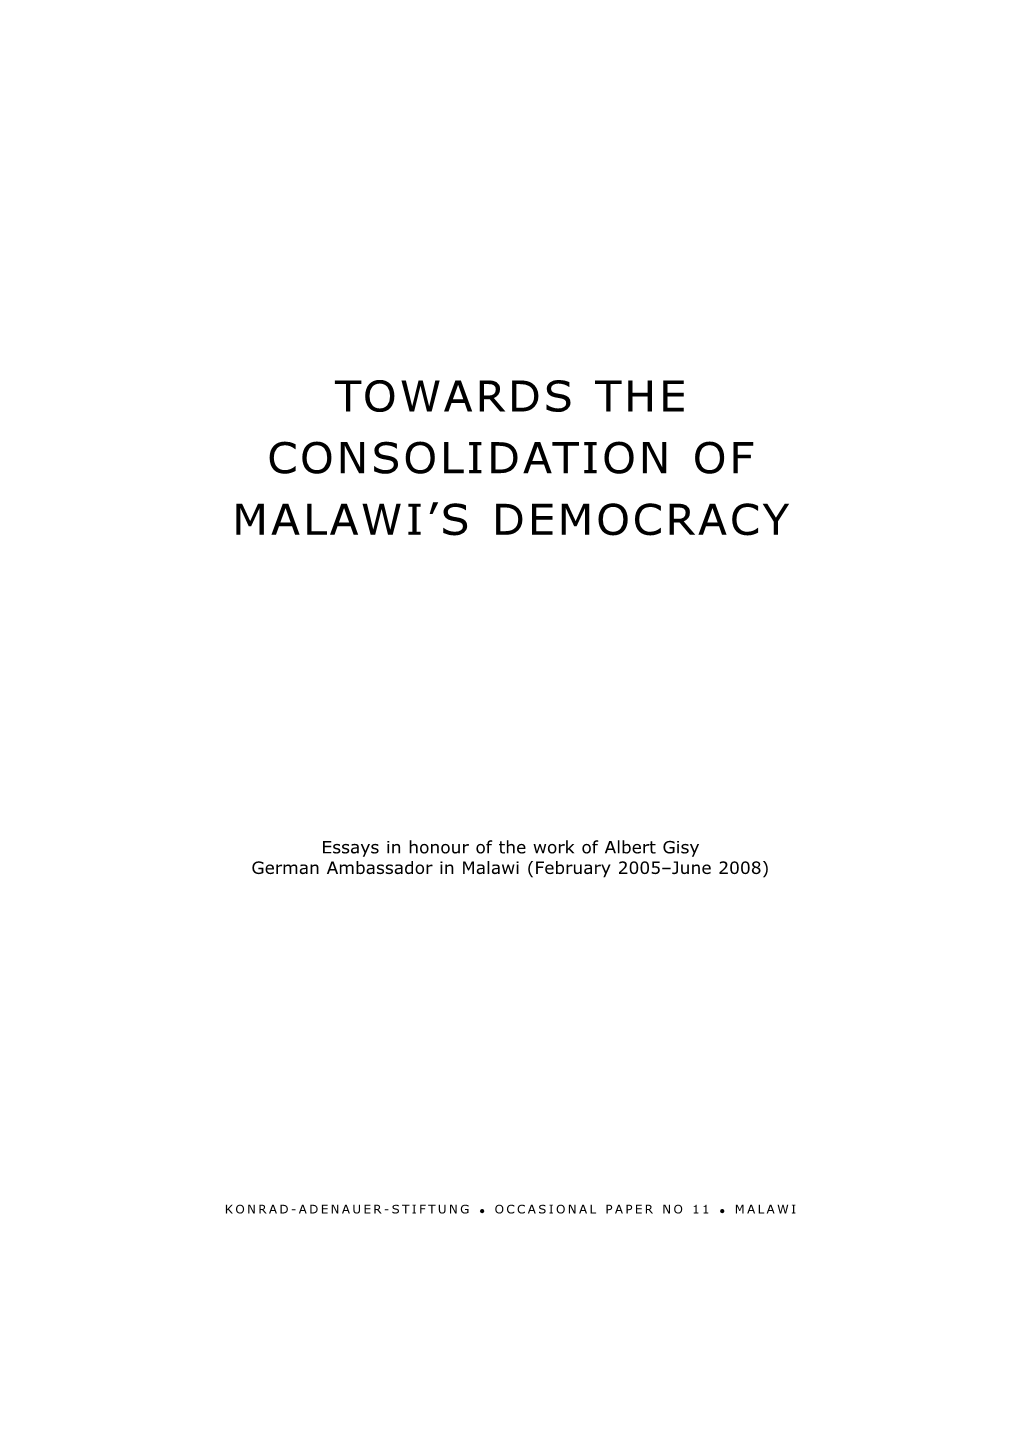 Towards the Consolidation of Malawi's Democracy